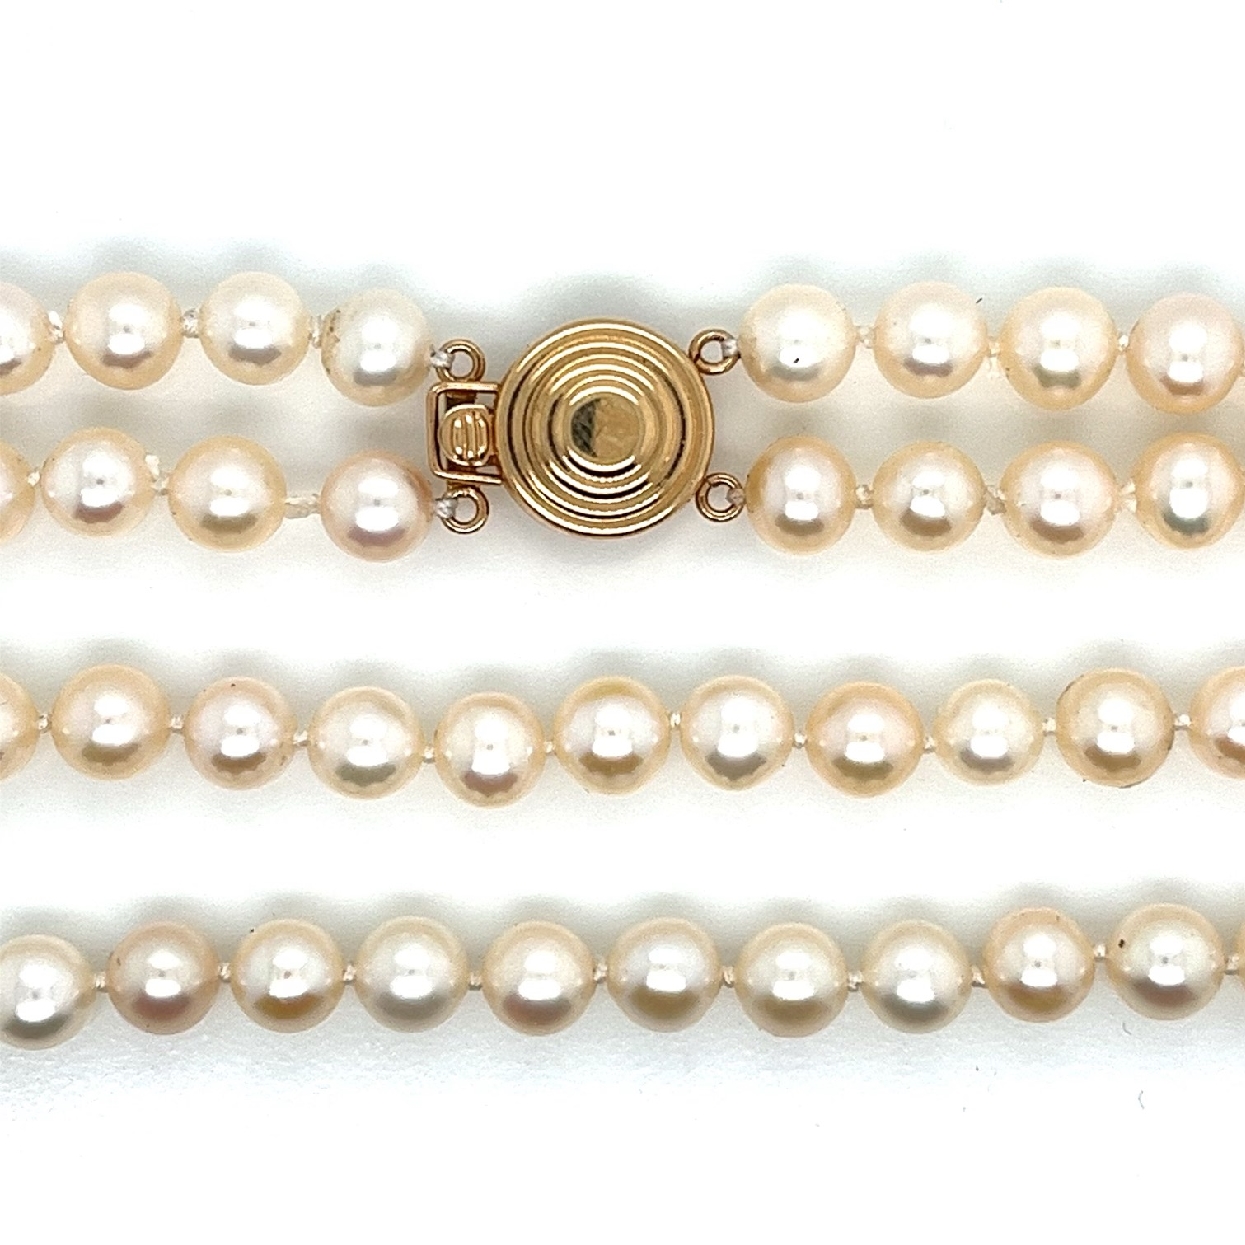 Double Strand of 5.5-6mm Akoya Pearls with 14K Yellow Gold Clasp 

Short Strand is 17 Inches 
Longer Strand is 18 Inches